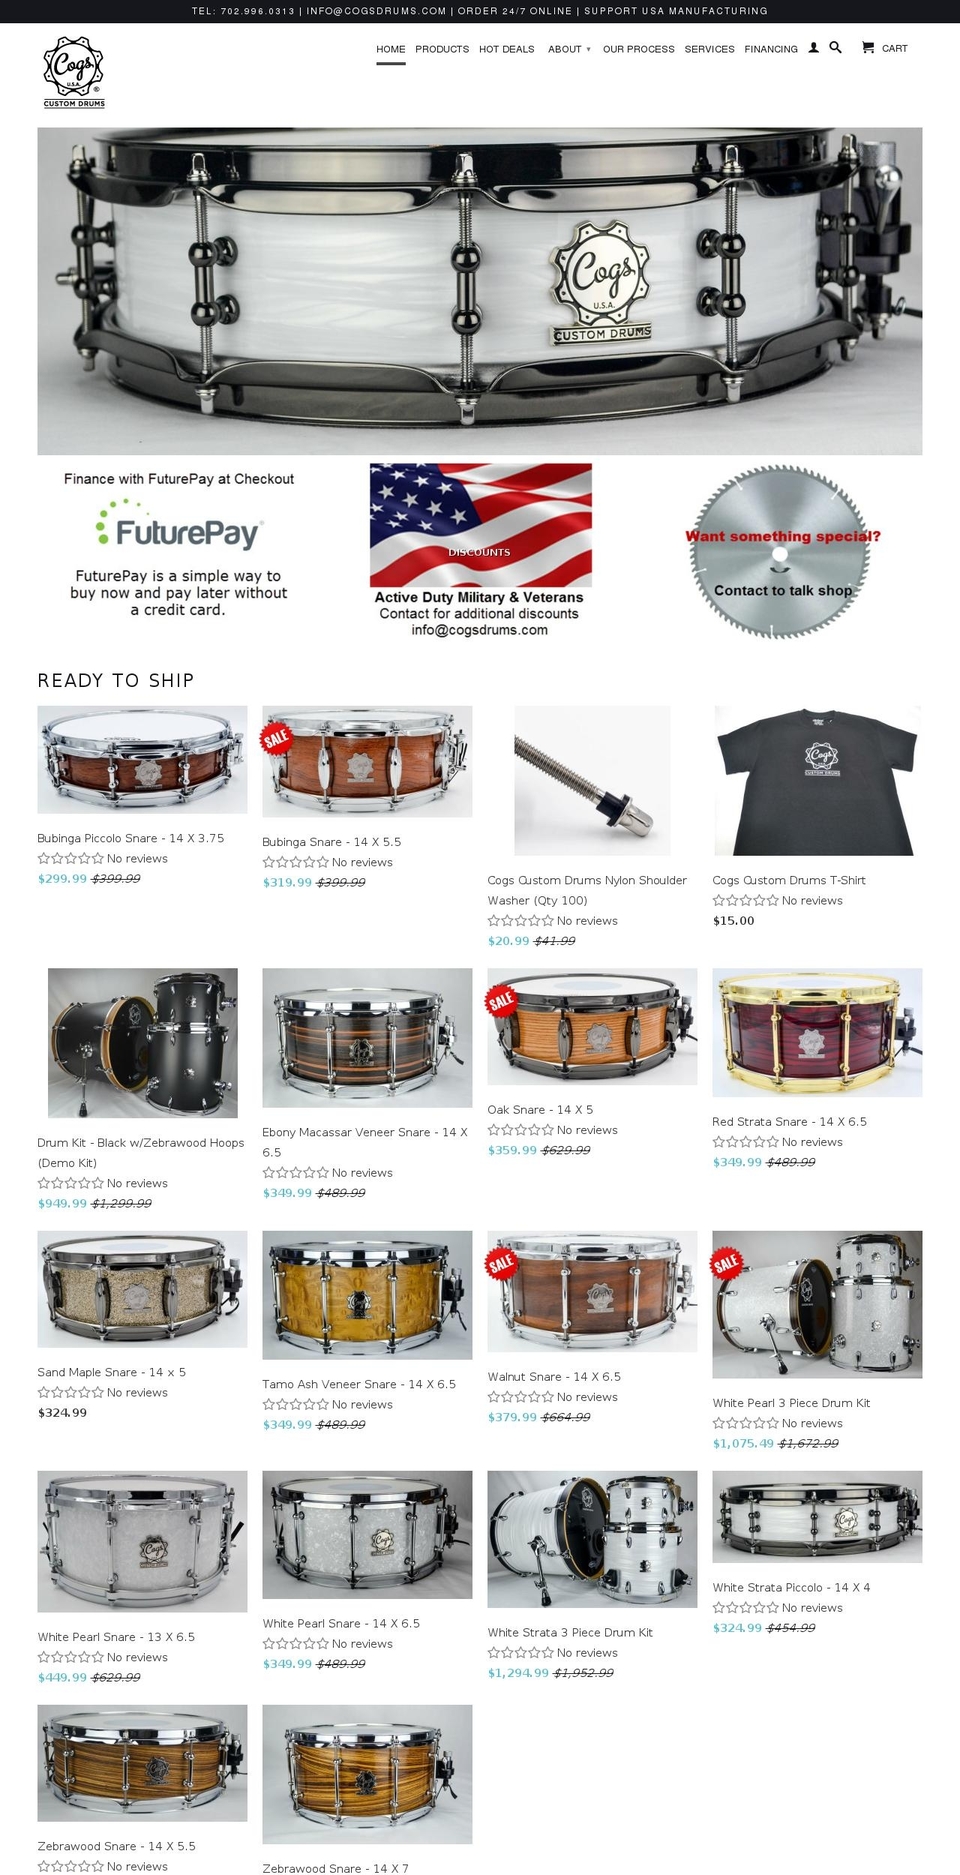 Capital Shopify theme site example cogsdrums.com